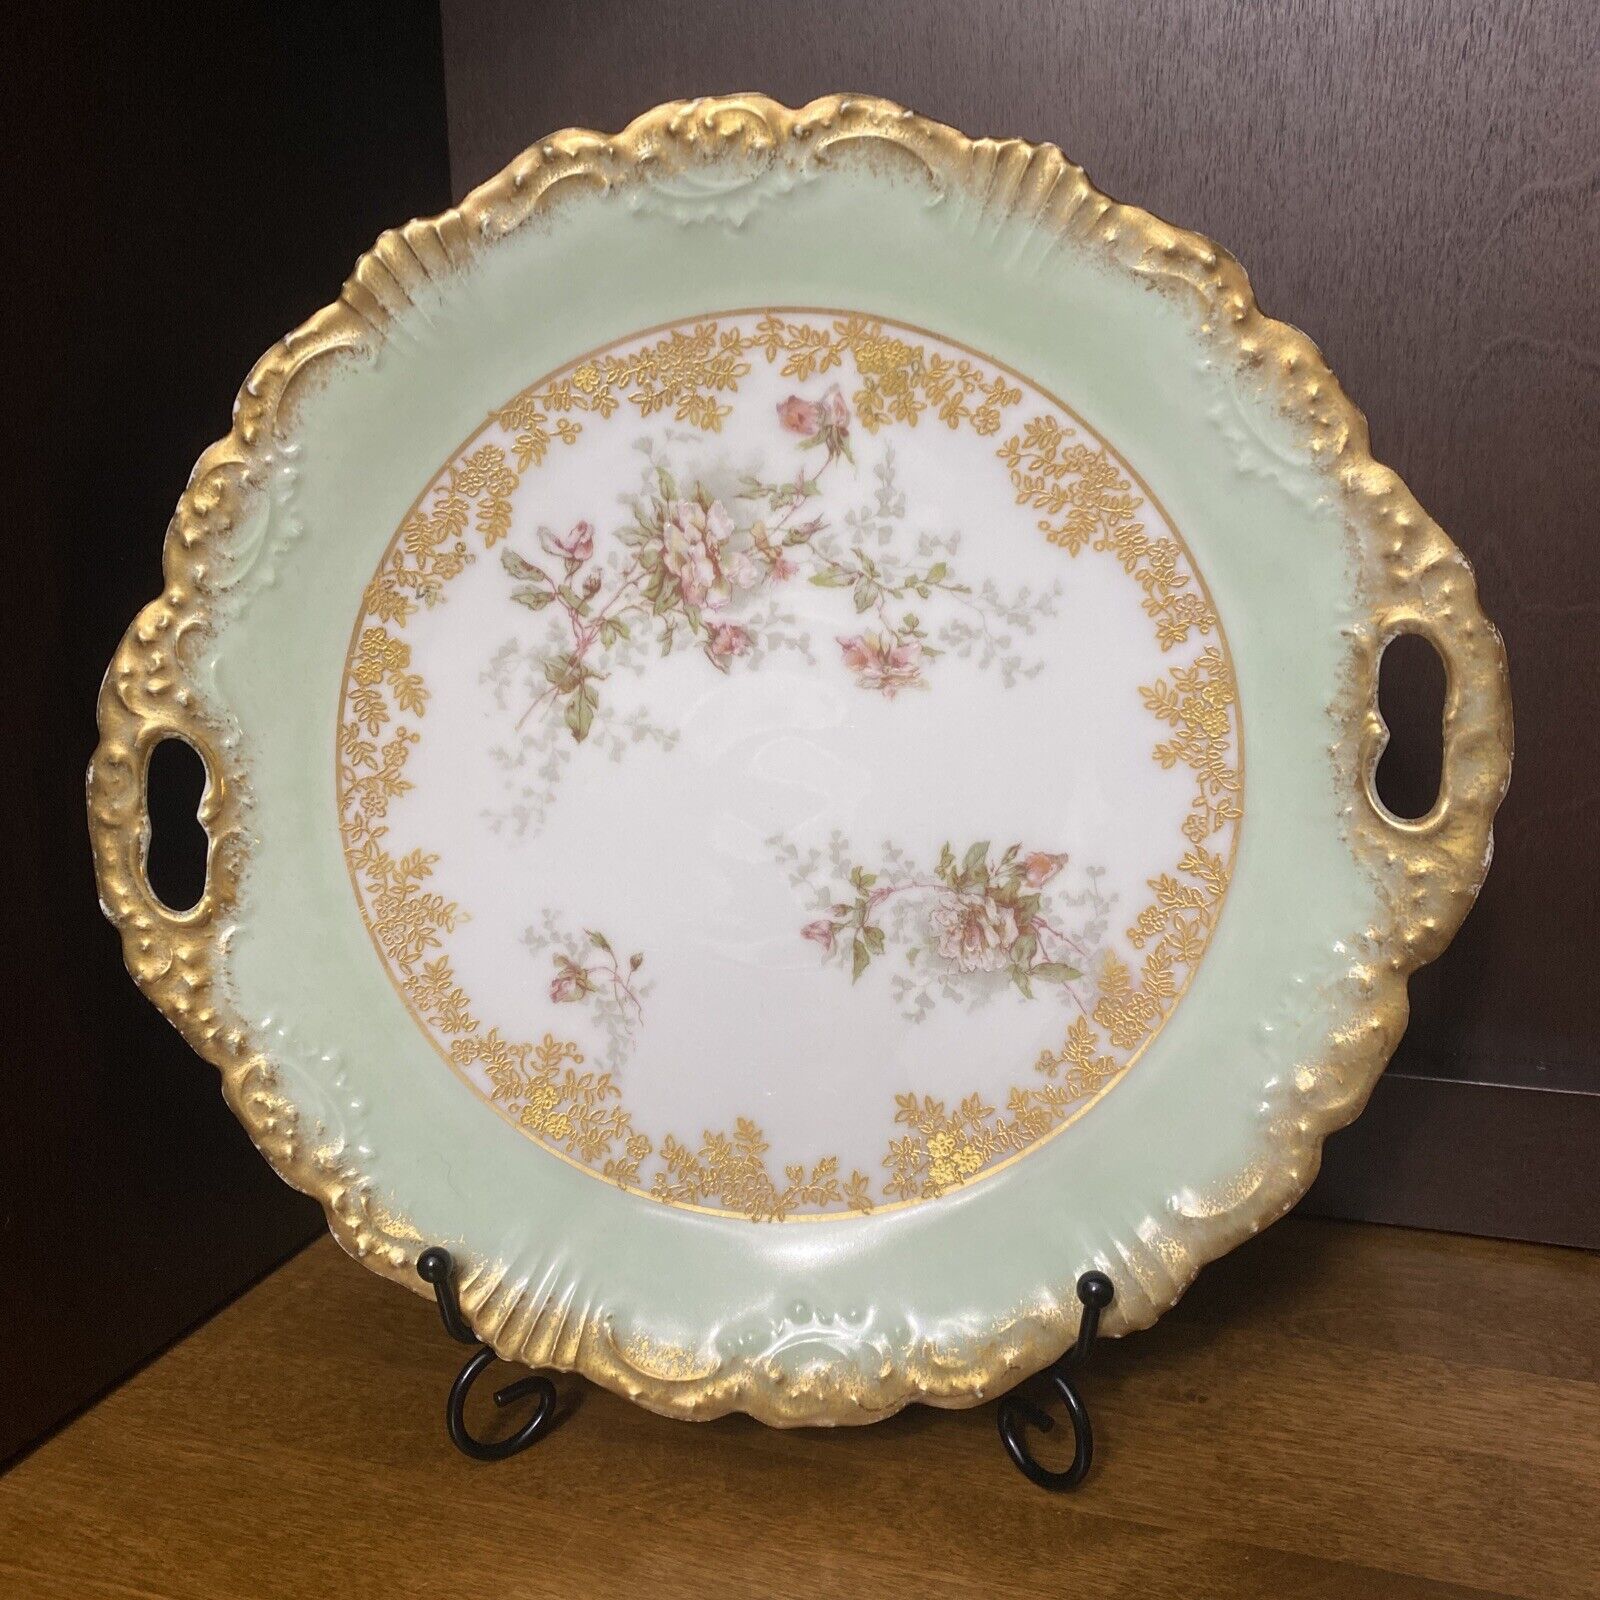 Beautiful Antique Limoges Hand Painted 10” Cake Plate w/Handles & Back Stamp